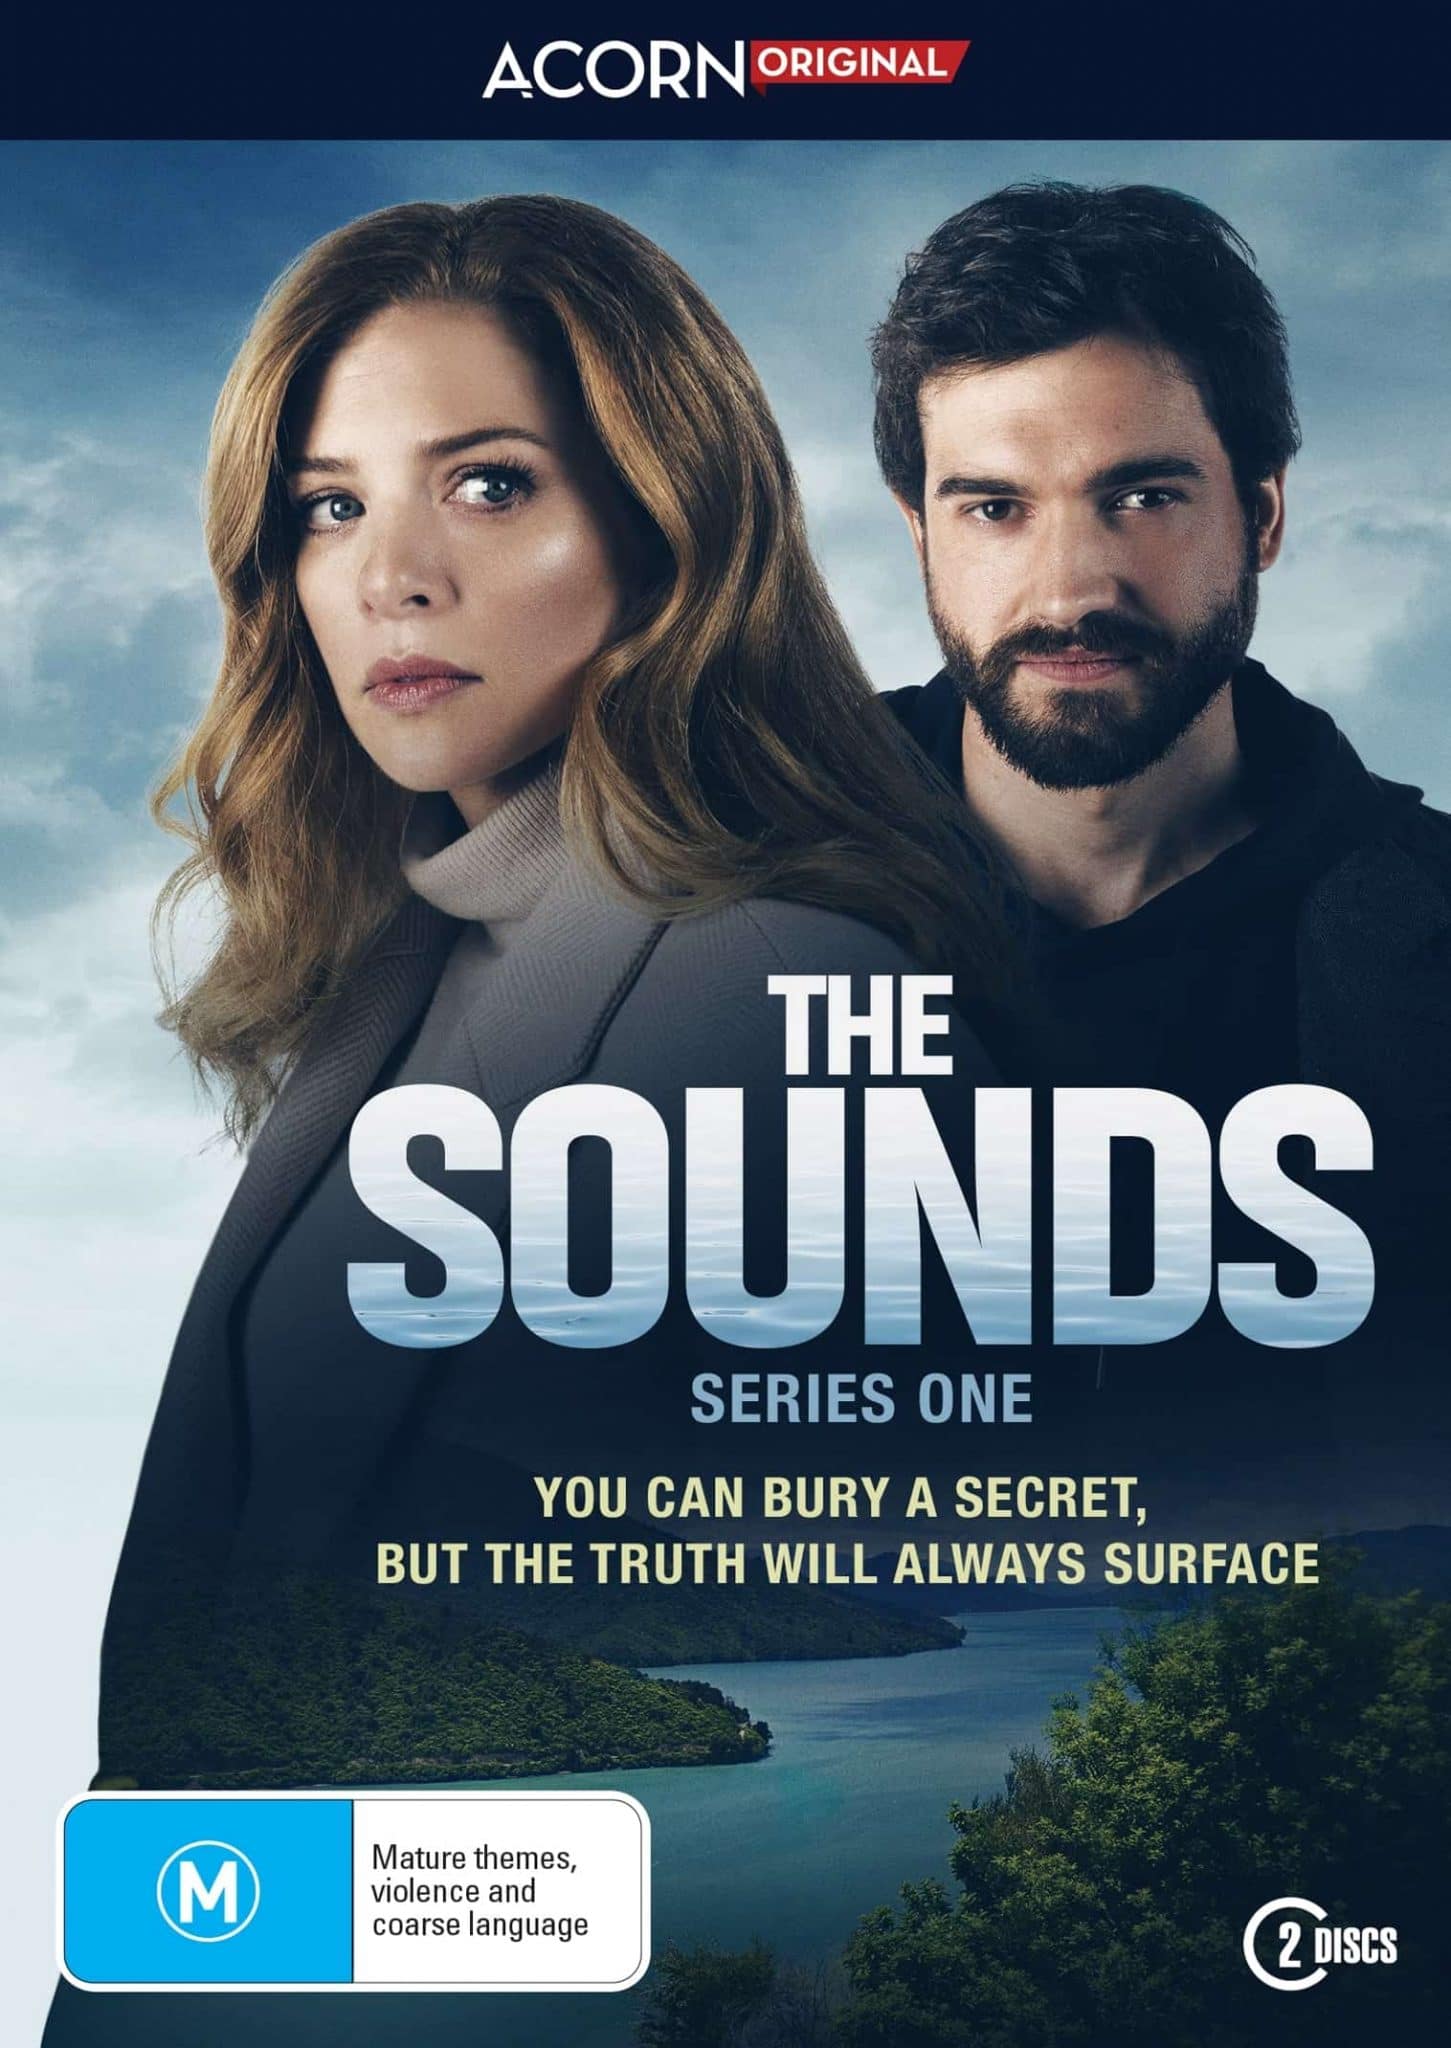 The Sounds DVDs